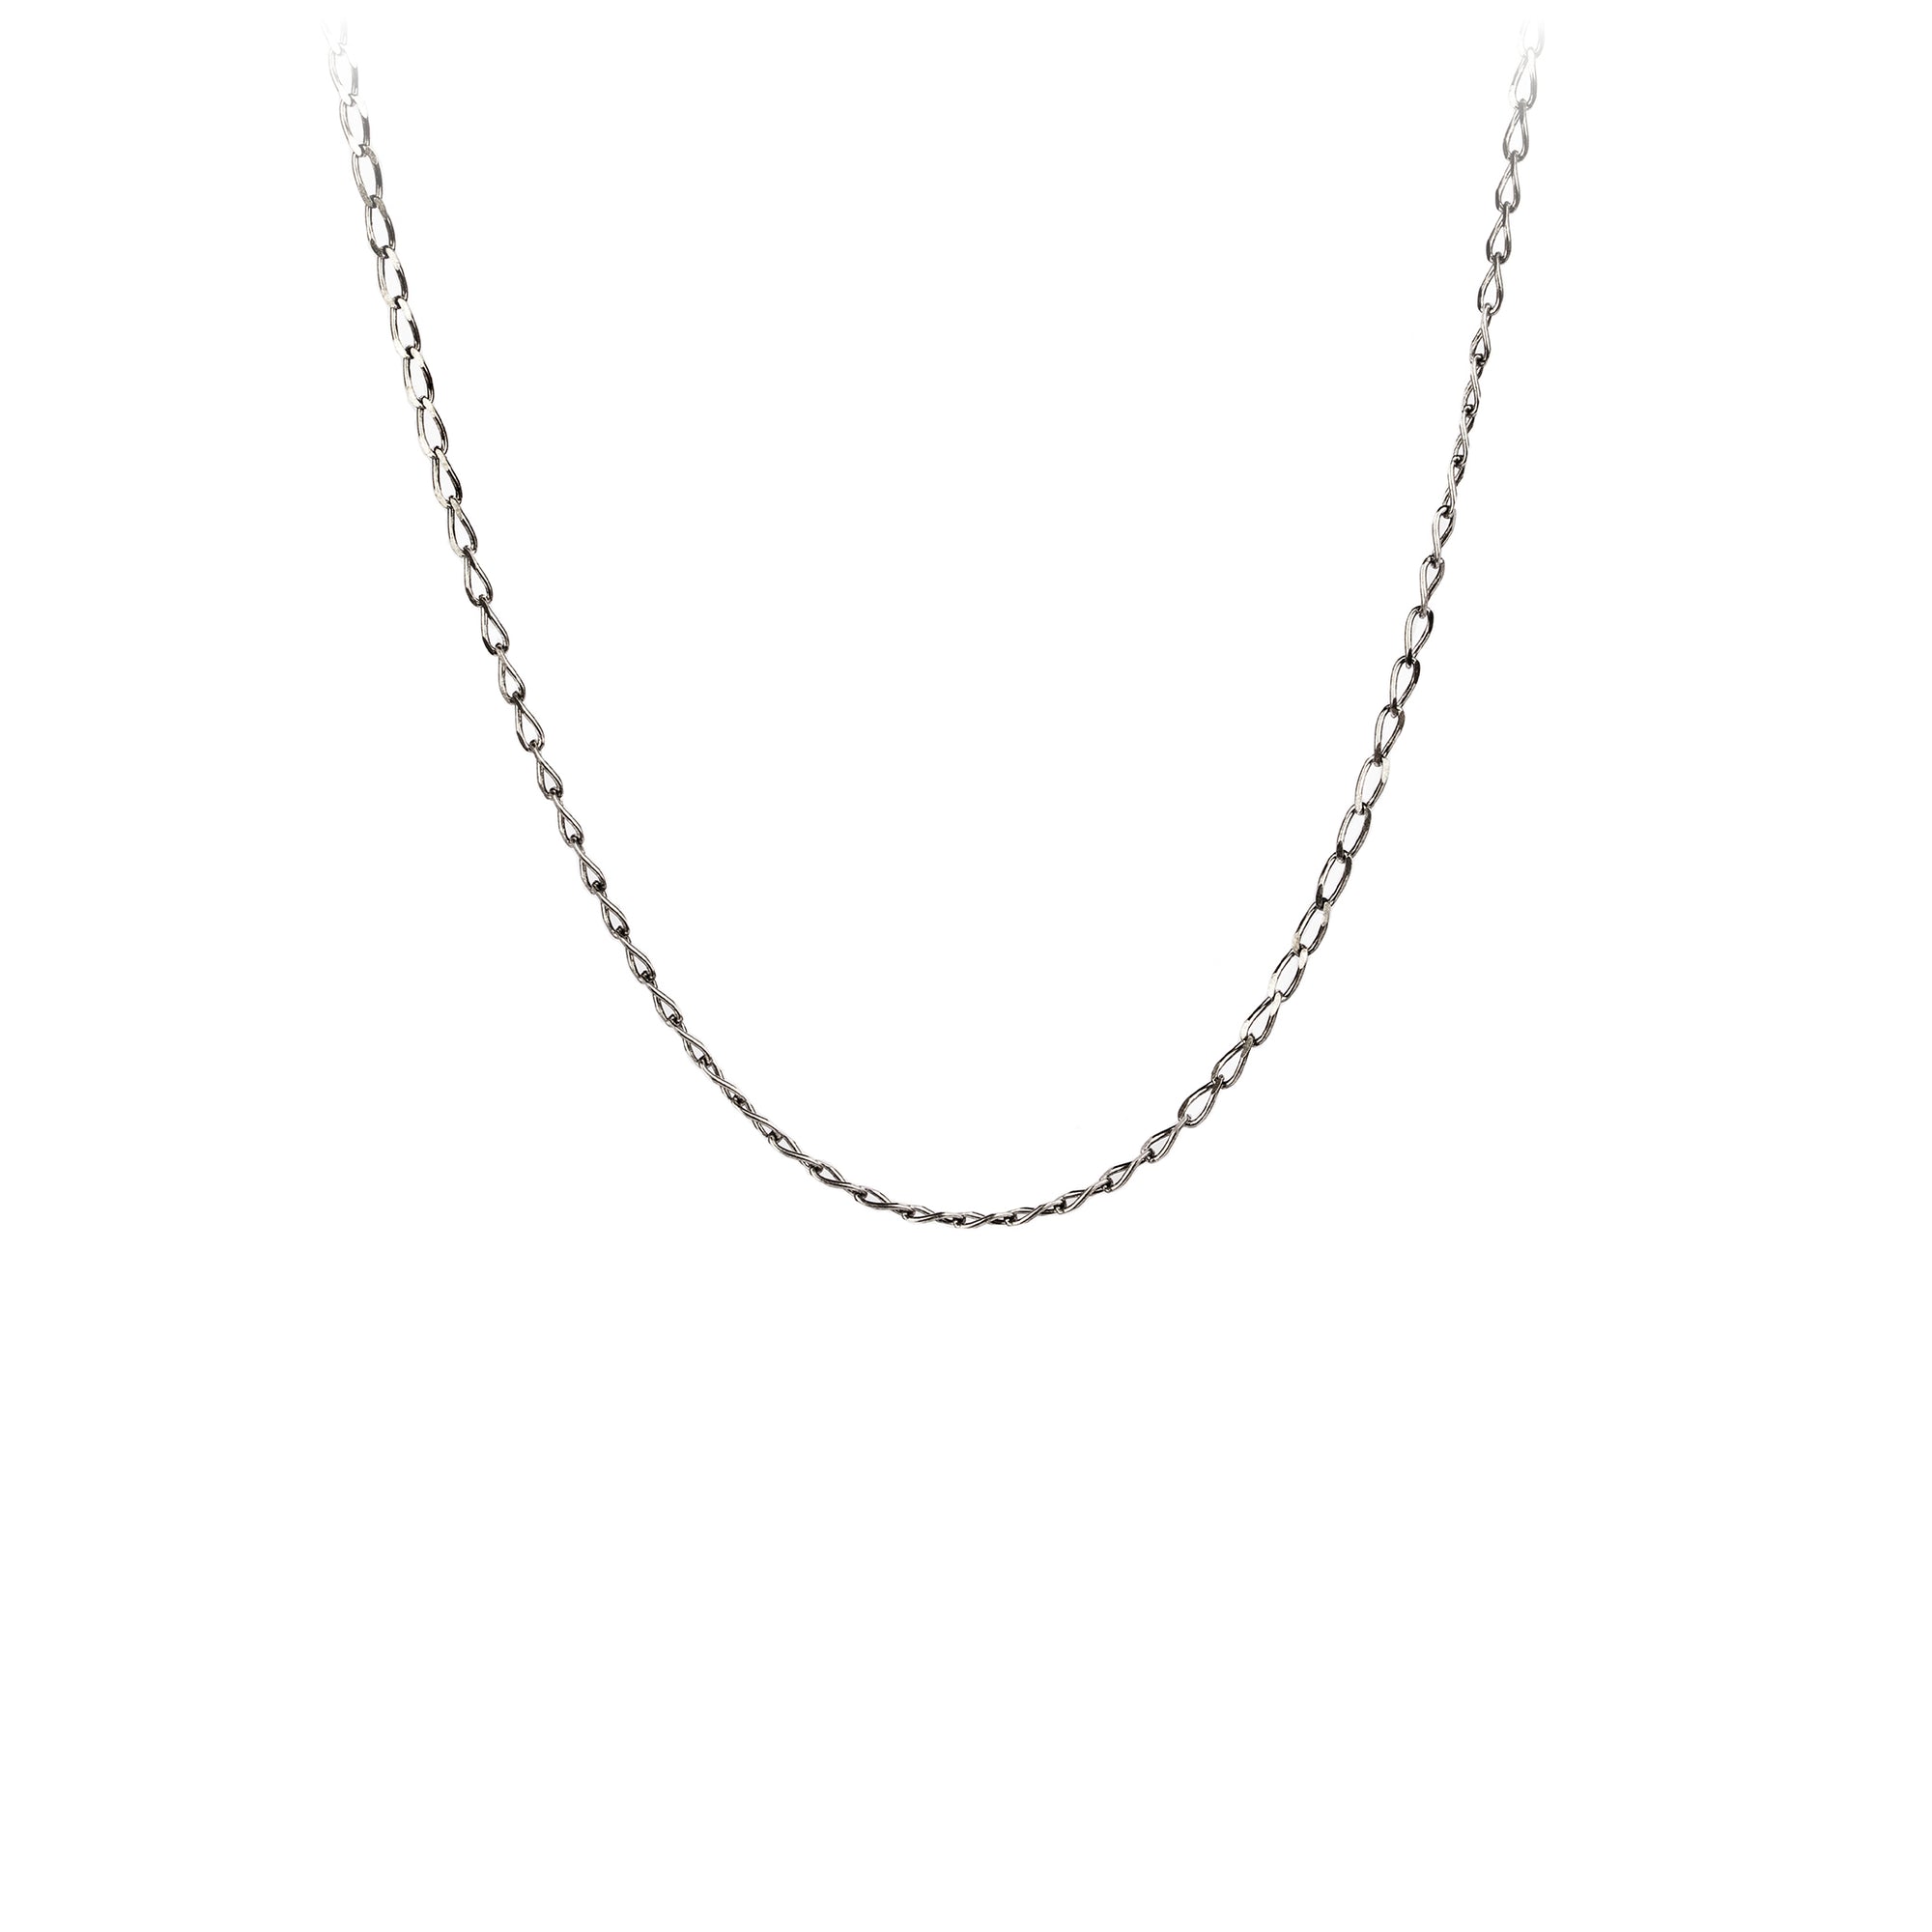 A sterling silver chain with medium open curb links